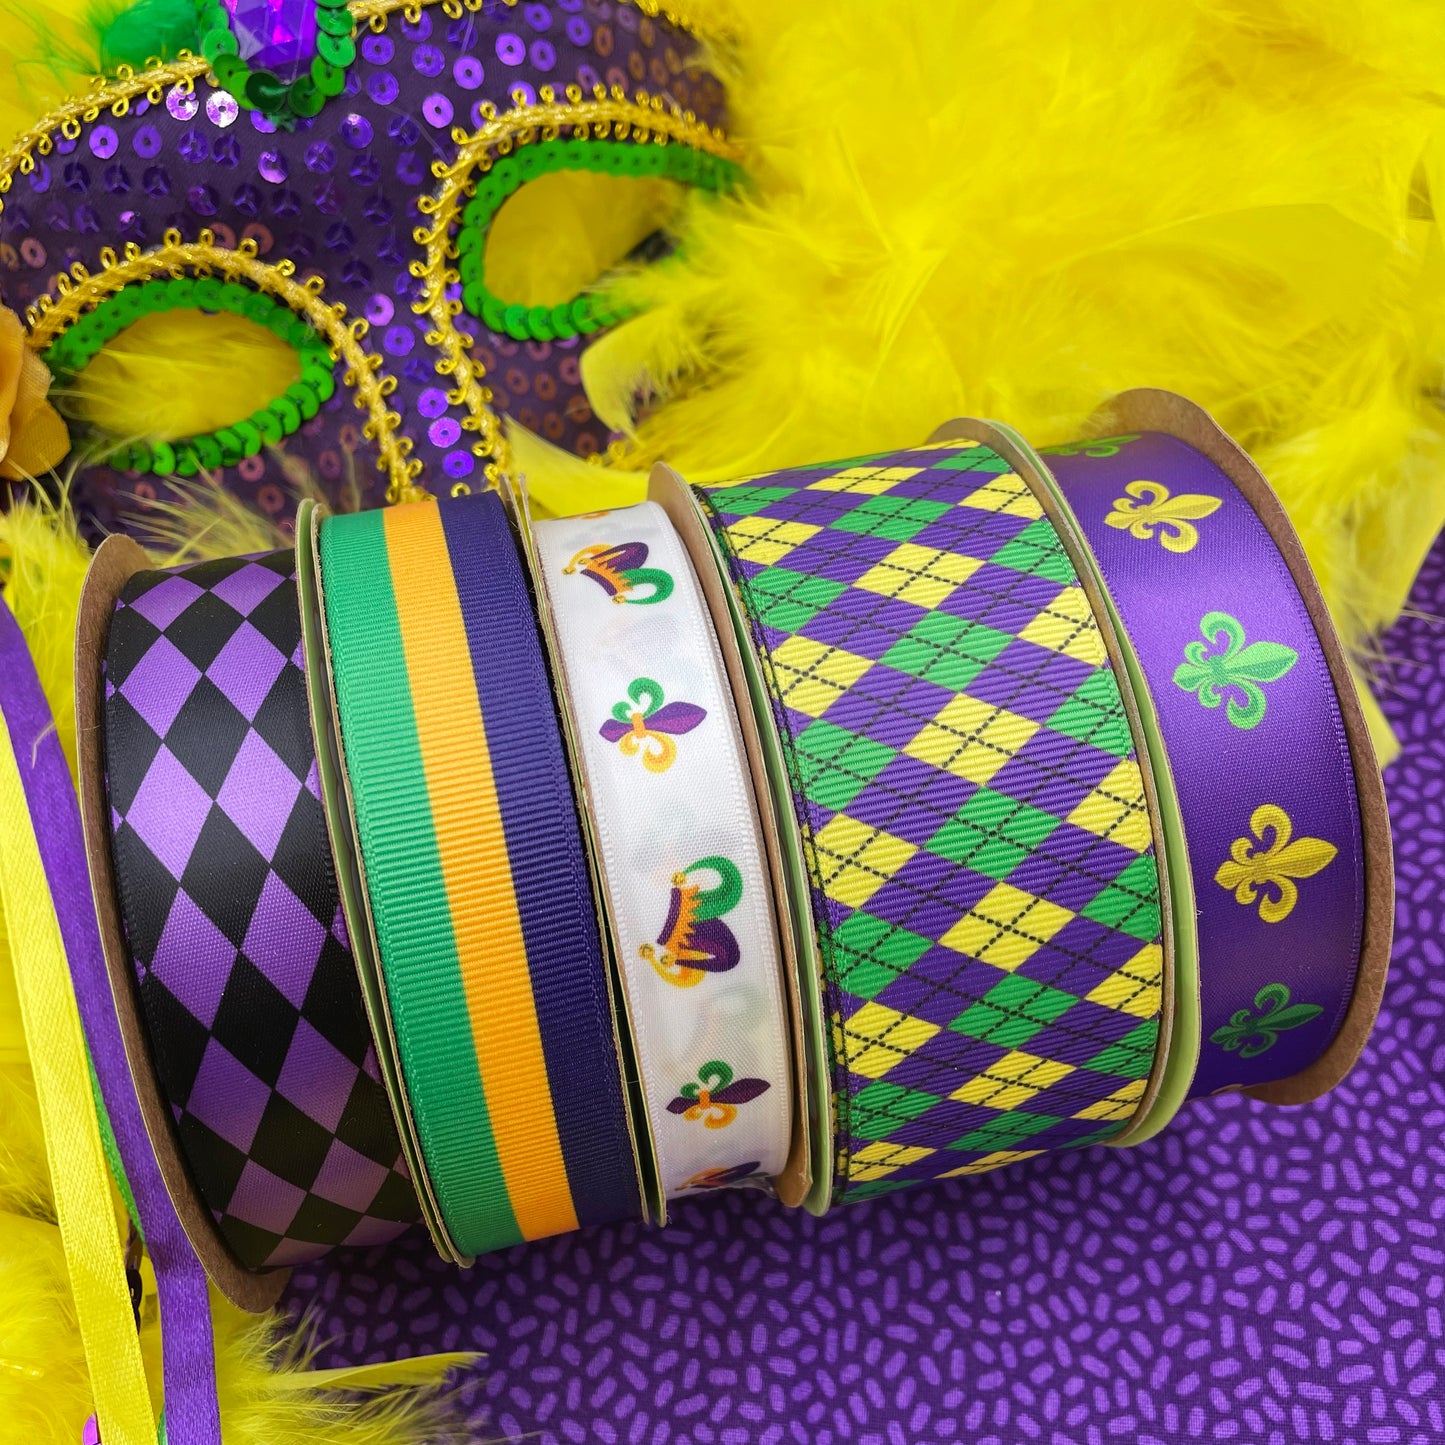 Mix and match all our Mardi Gras ribbon for the best Fat Tuesday celebration ever!